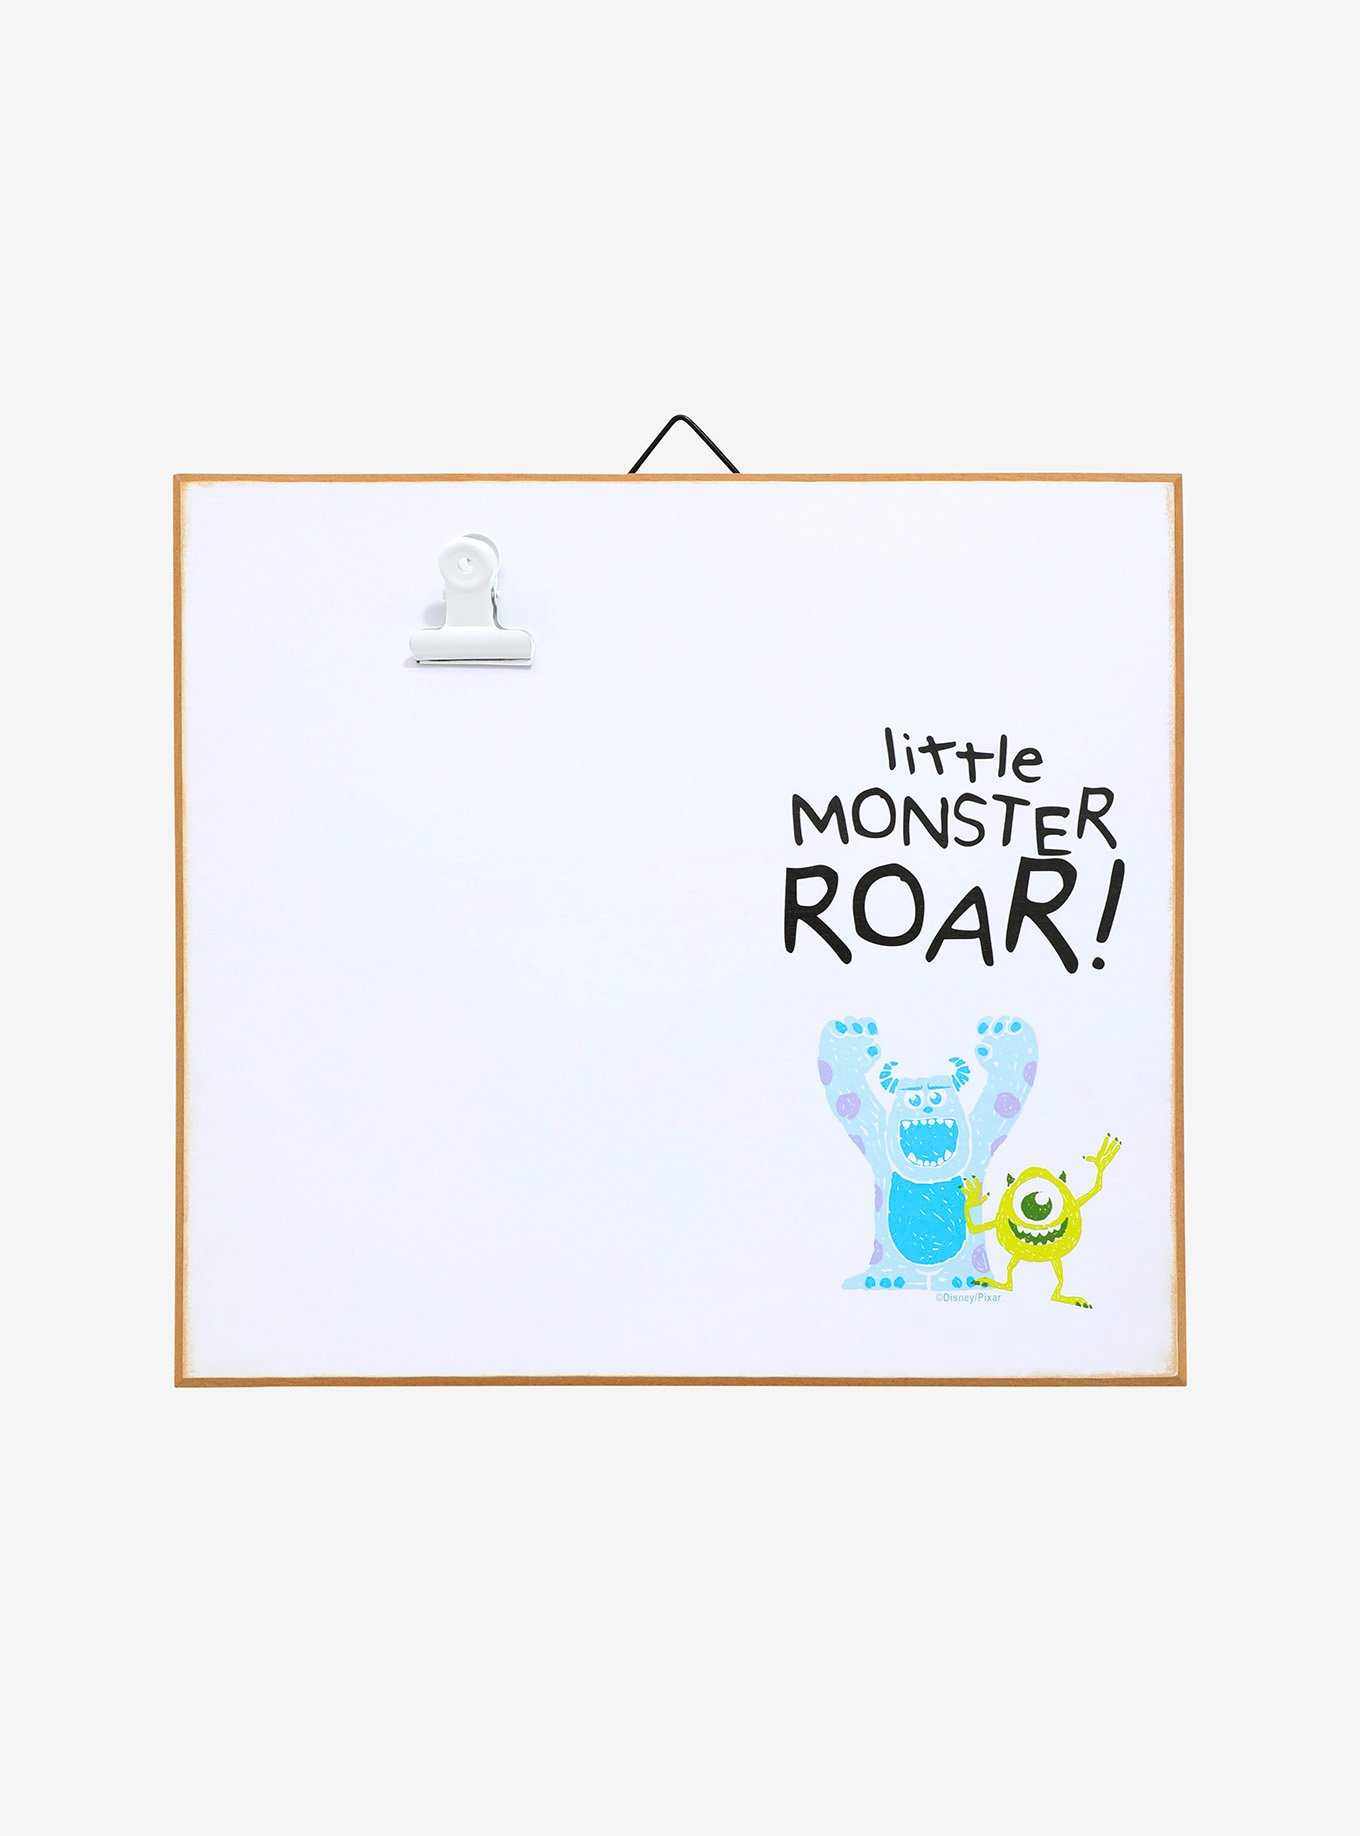 Disney Pixar Monsters, Inc. Mike & Sulley Frame With Clip, , hi-res